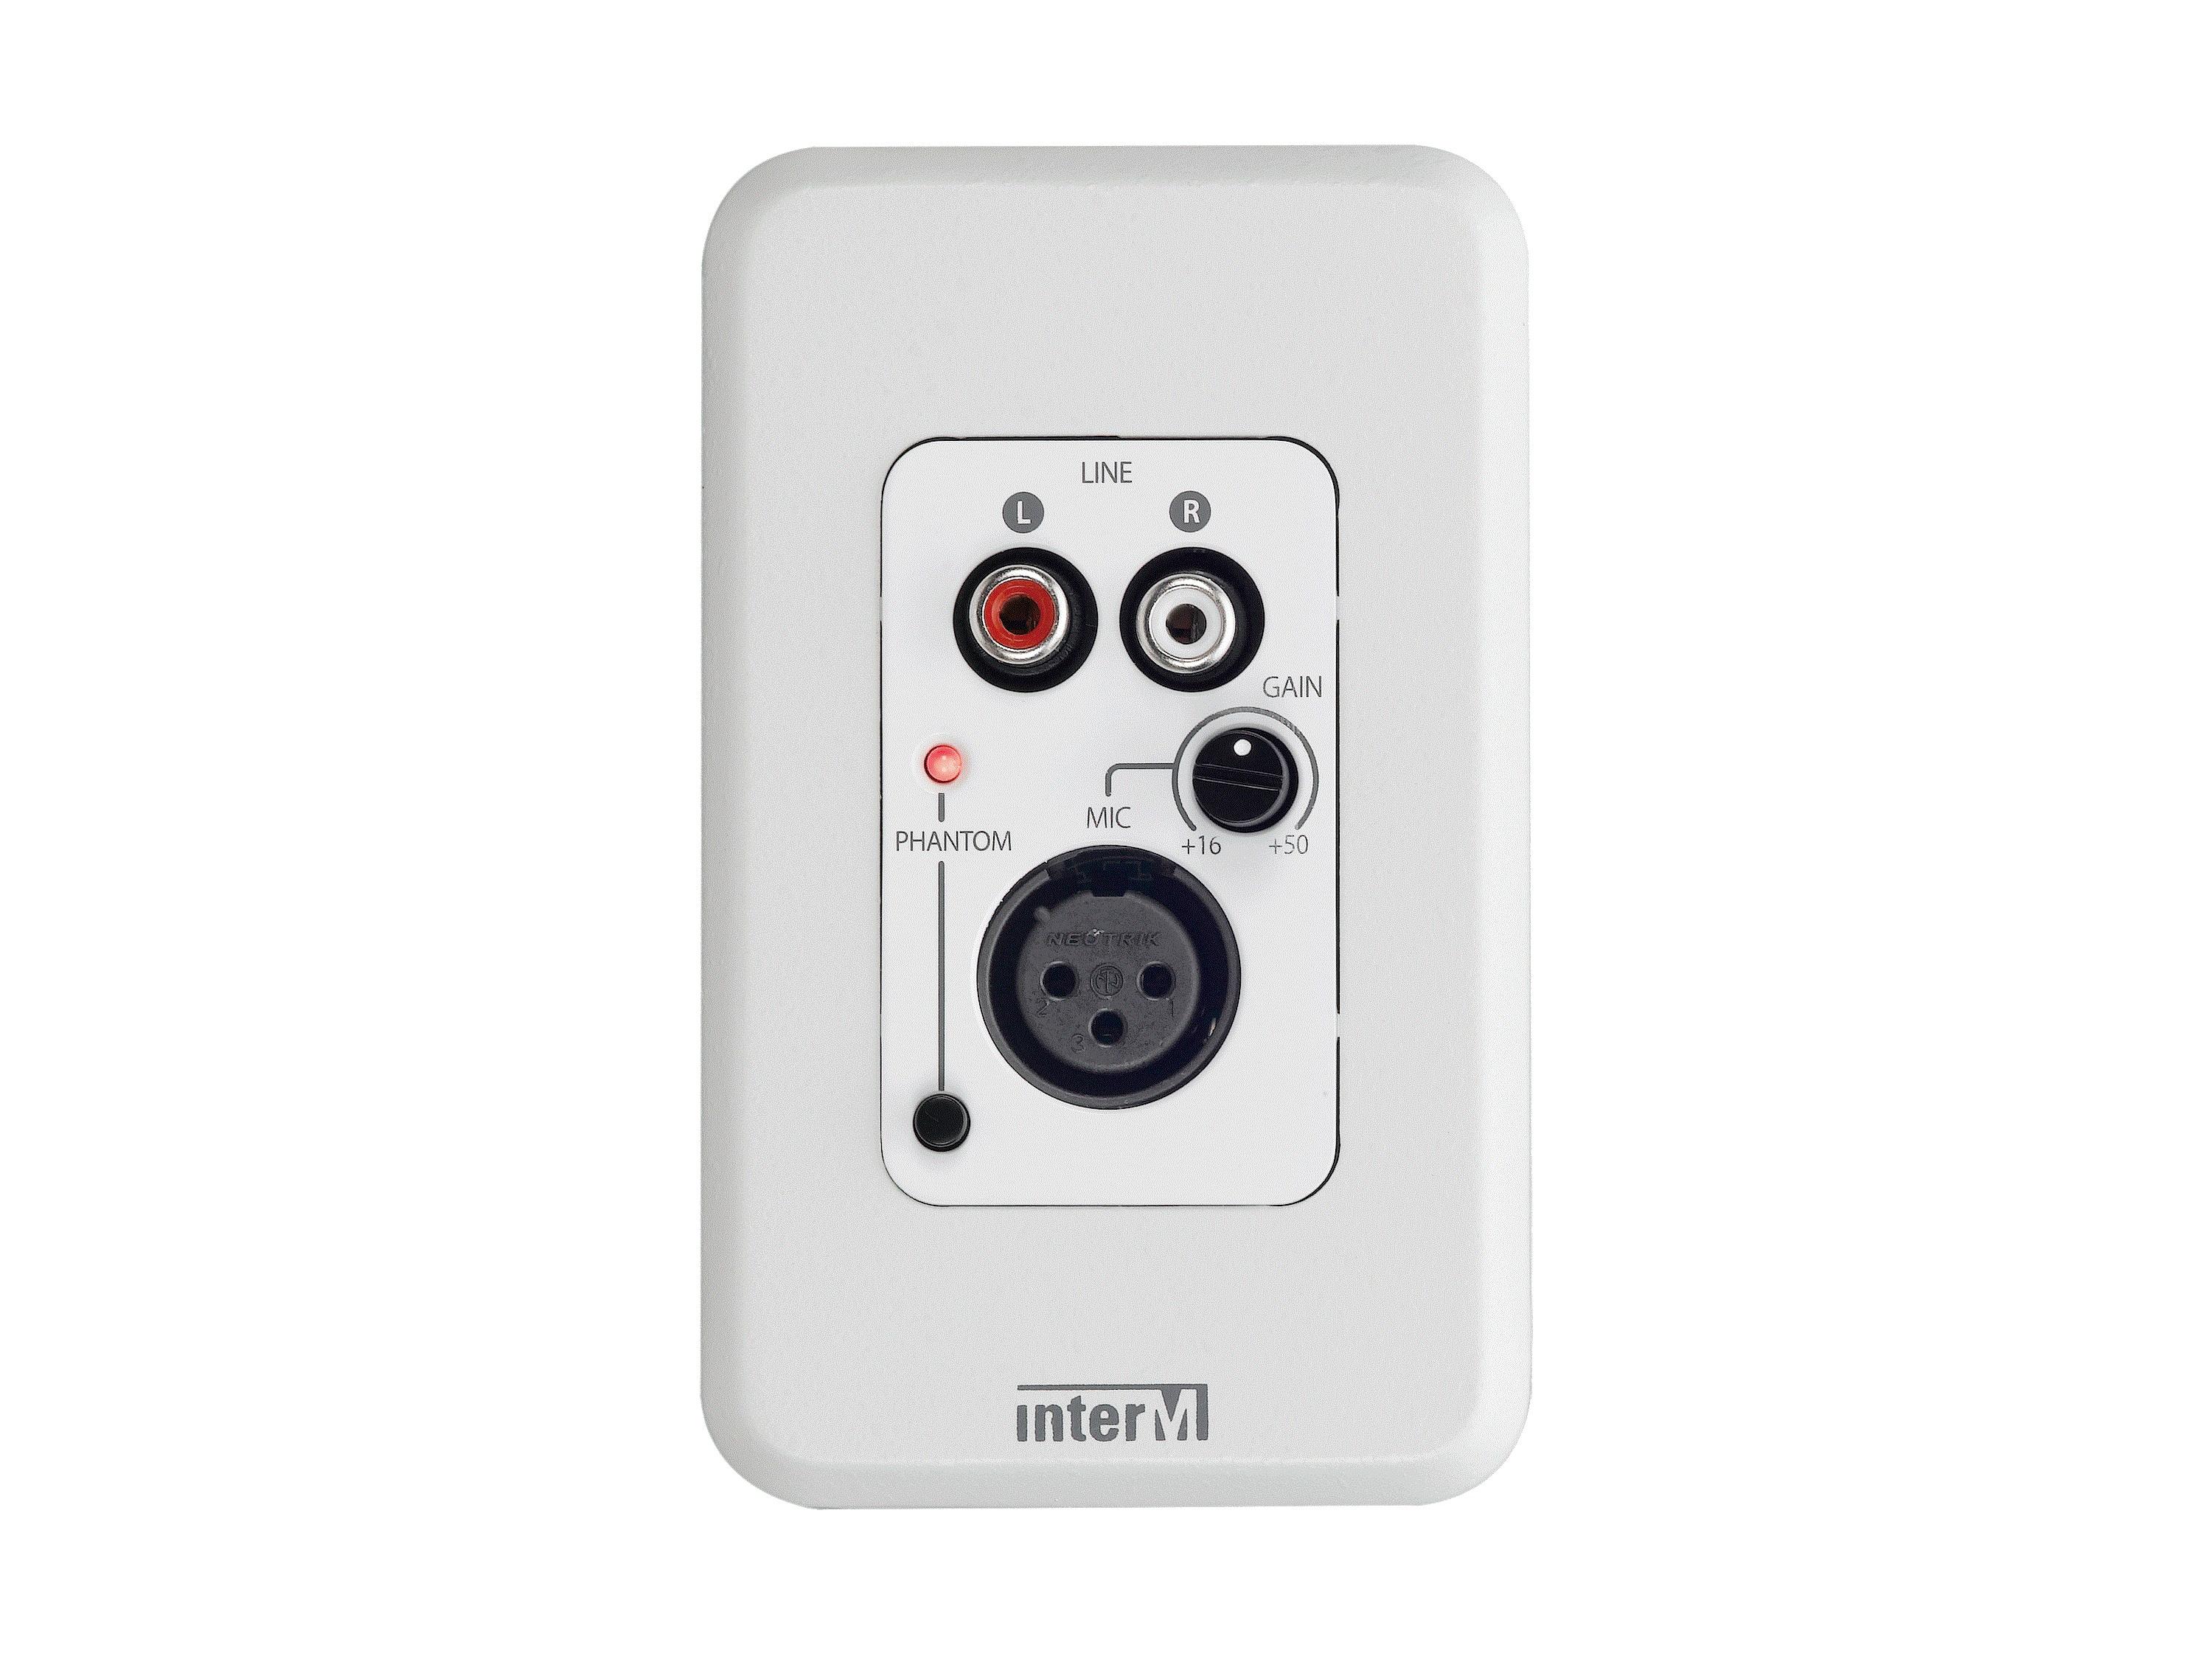 NLM-8000A Wall Mount Remote Control for NPX-8000 with Local Microphone or BGM Input by Inter-M